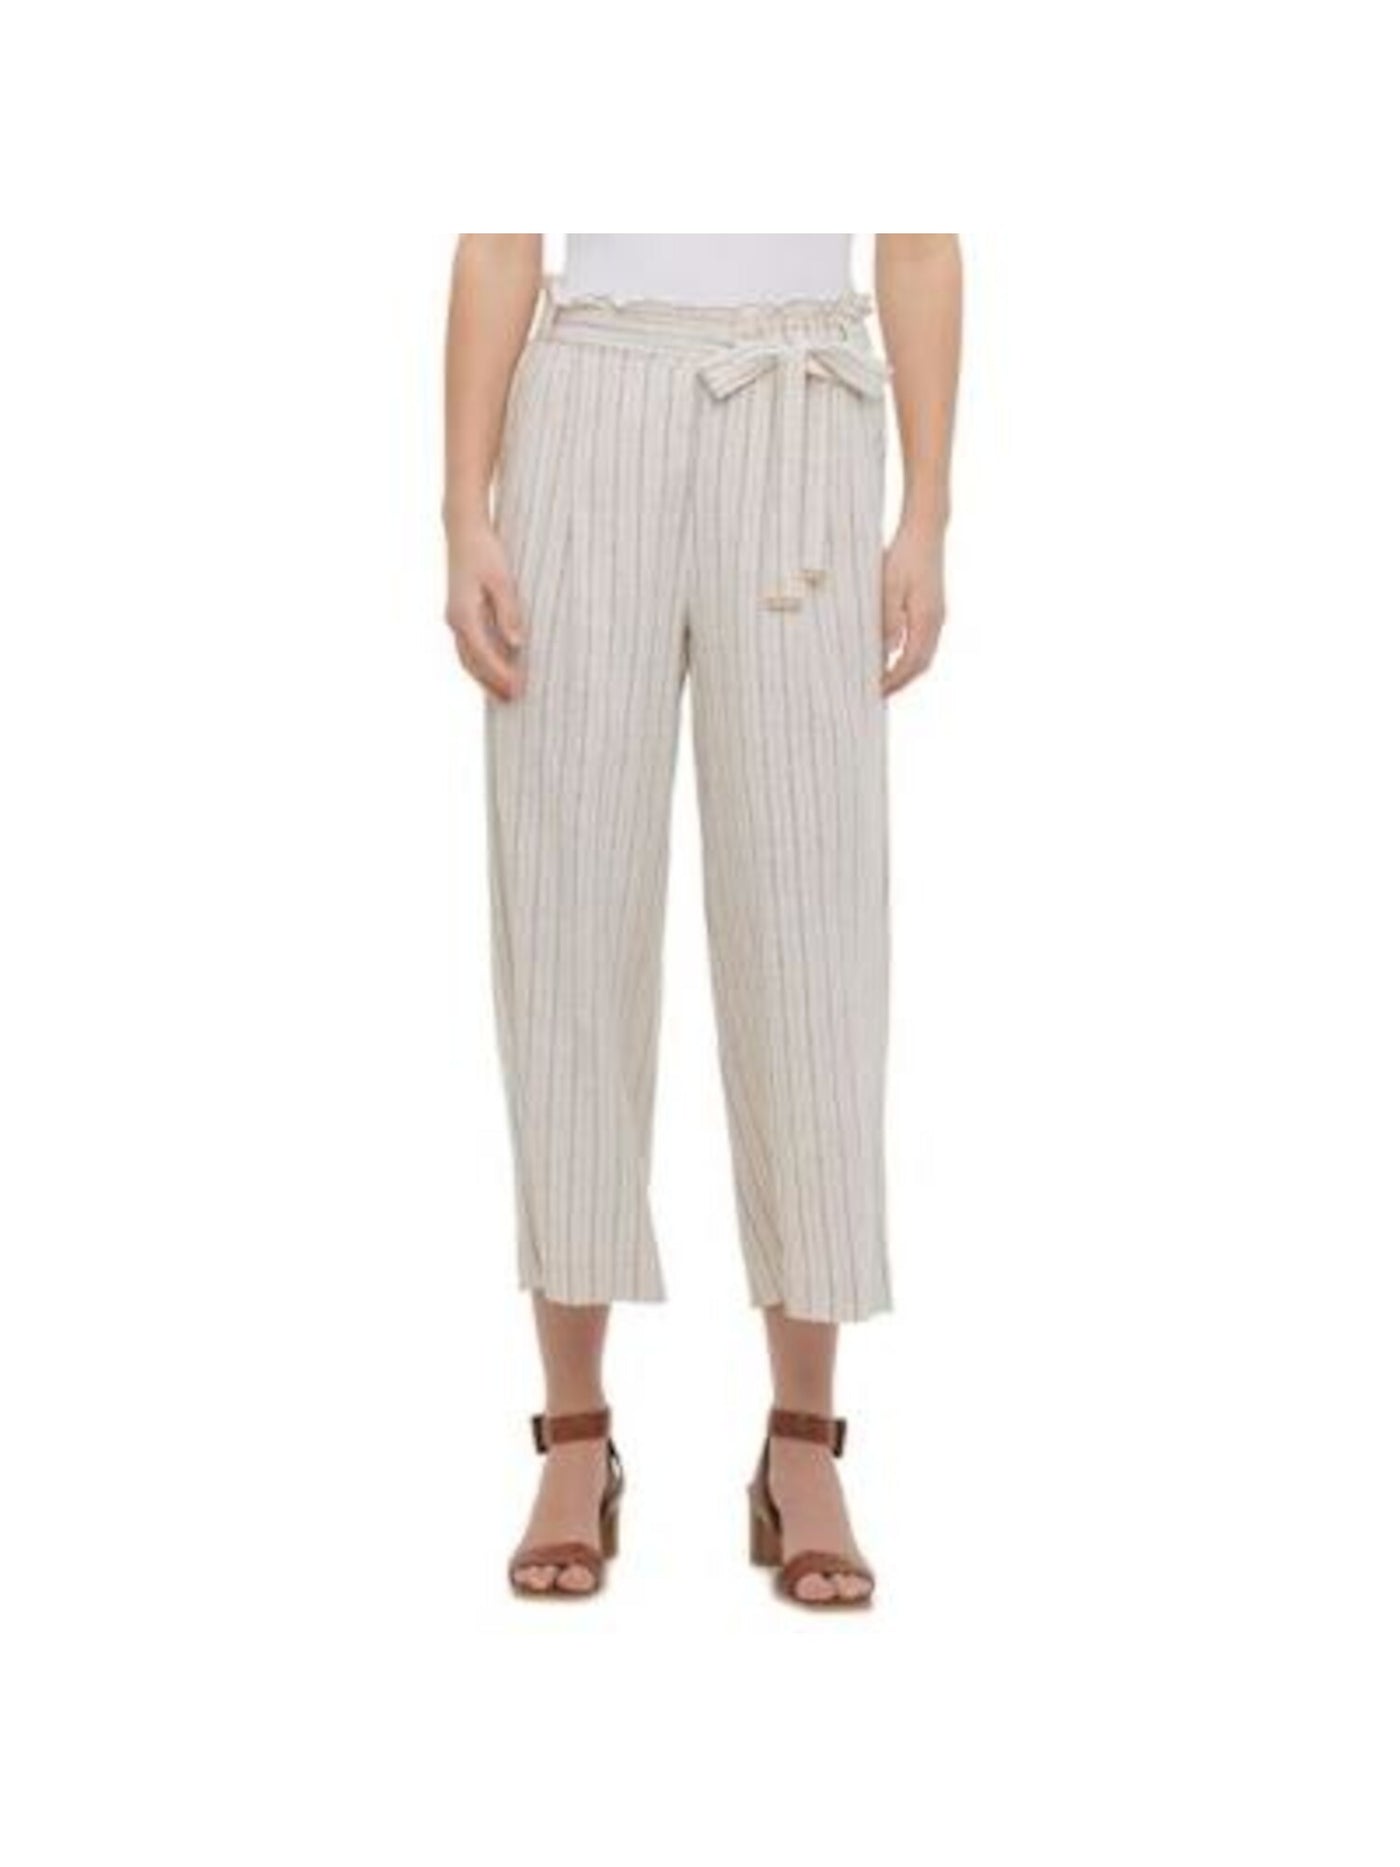 CALVIN KLEIN Womens Beige Belted Pocketed Striped Cropped Pants Size: L